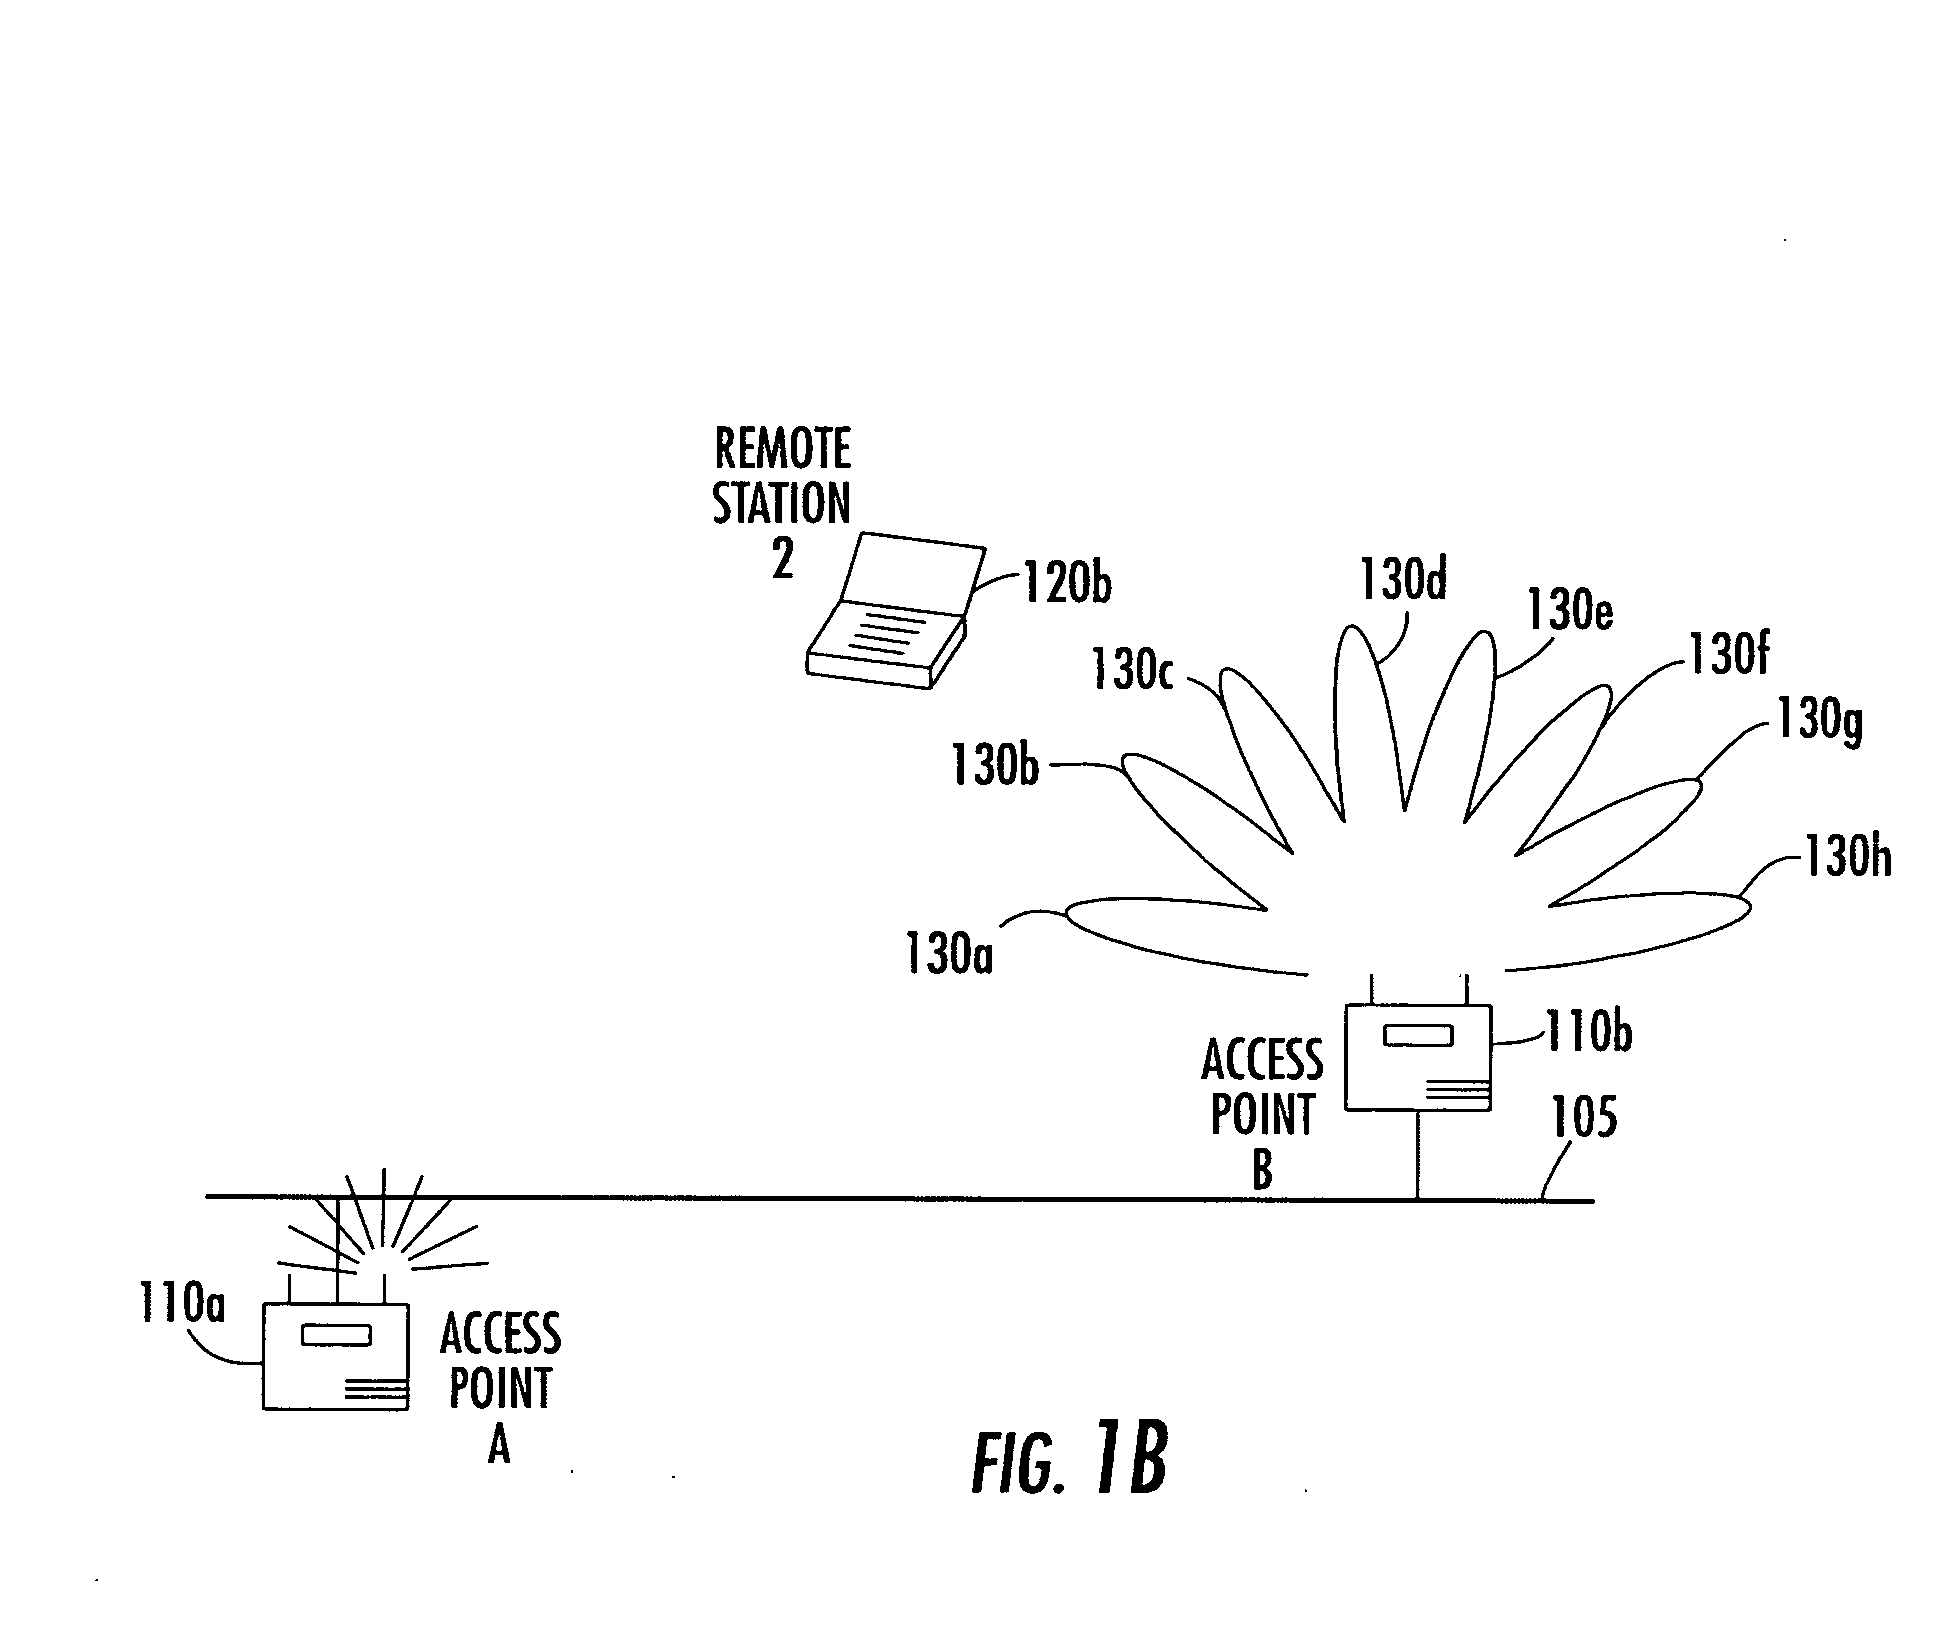 Antenna steering for an access point based upon control frames